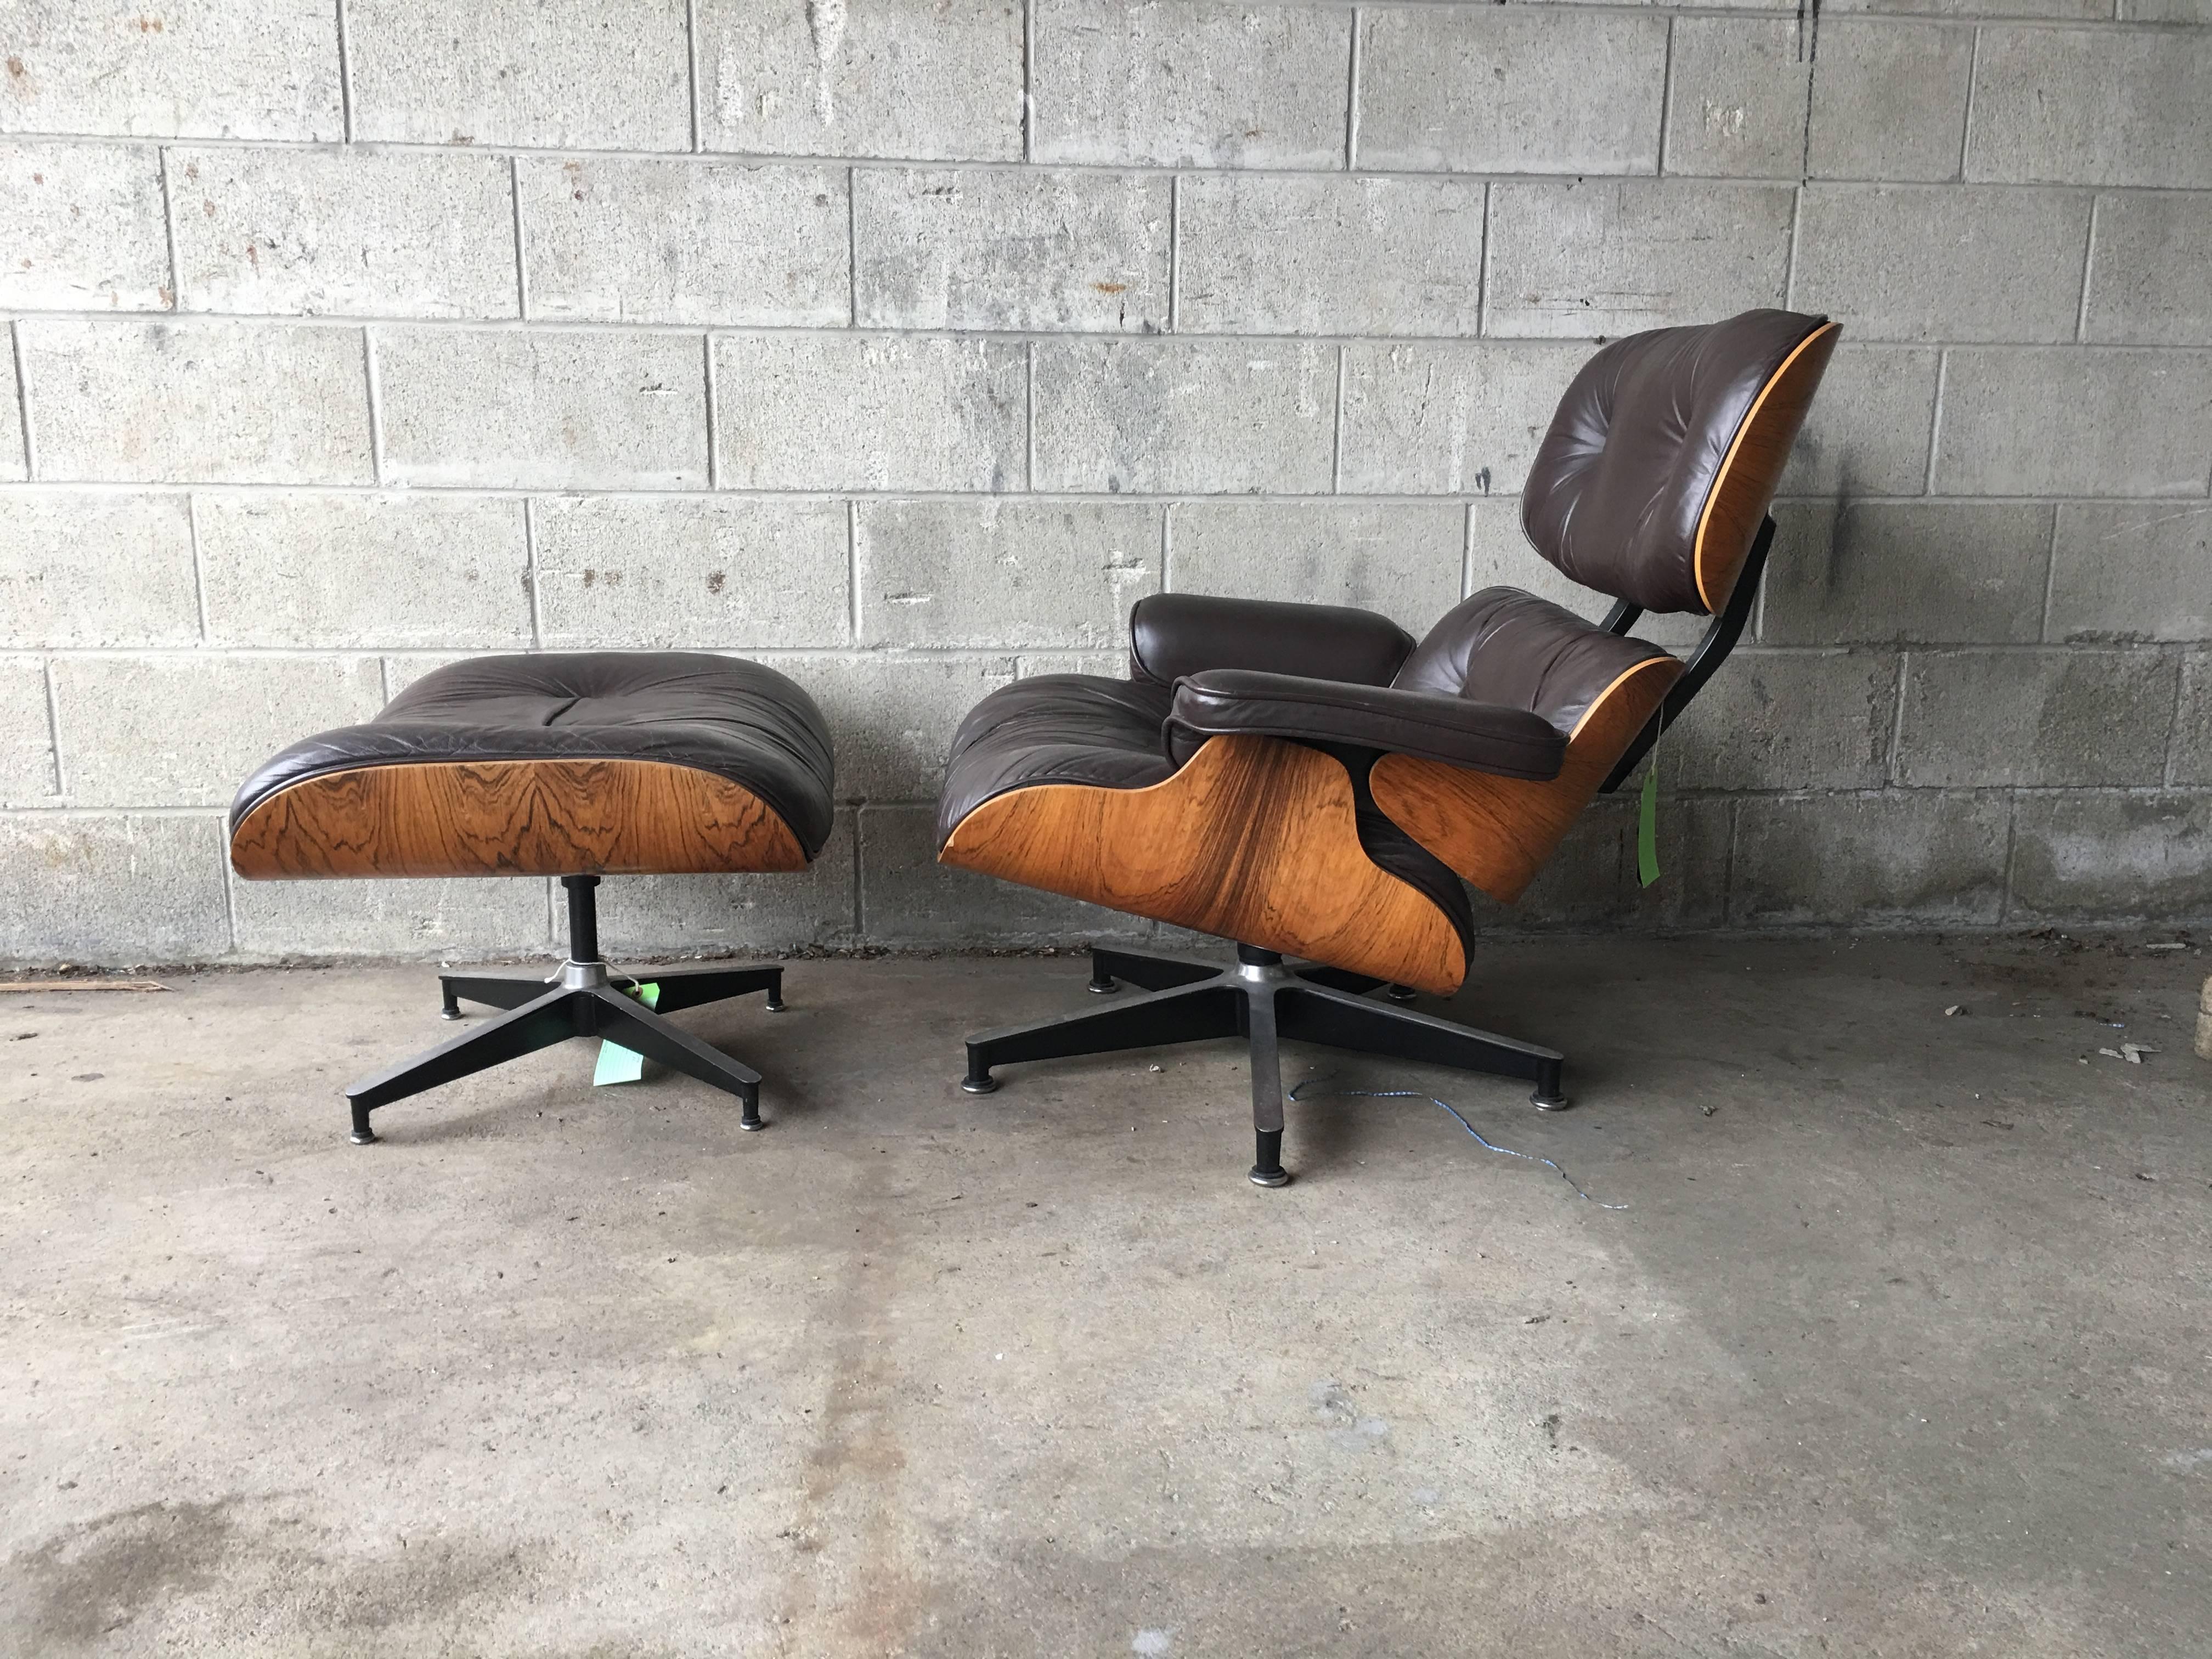 American Herman Miller Eames Rosewood Lounge and Ottoman